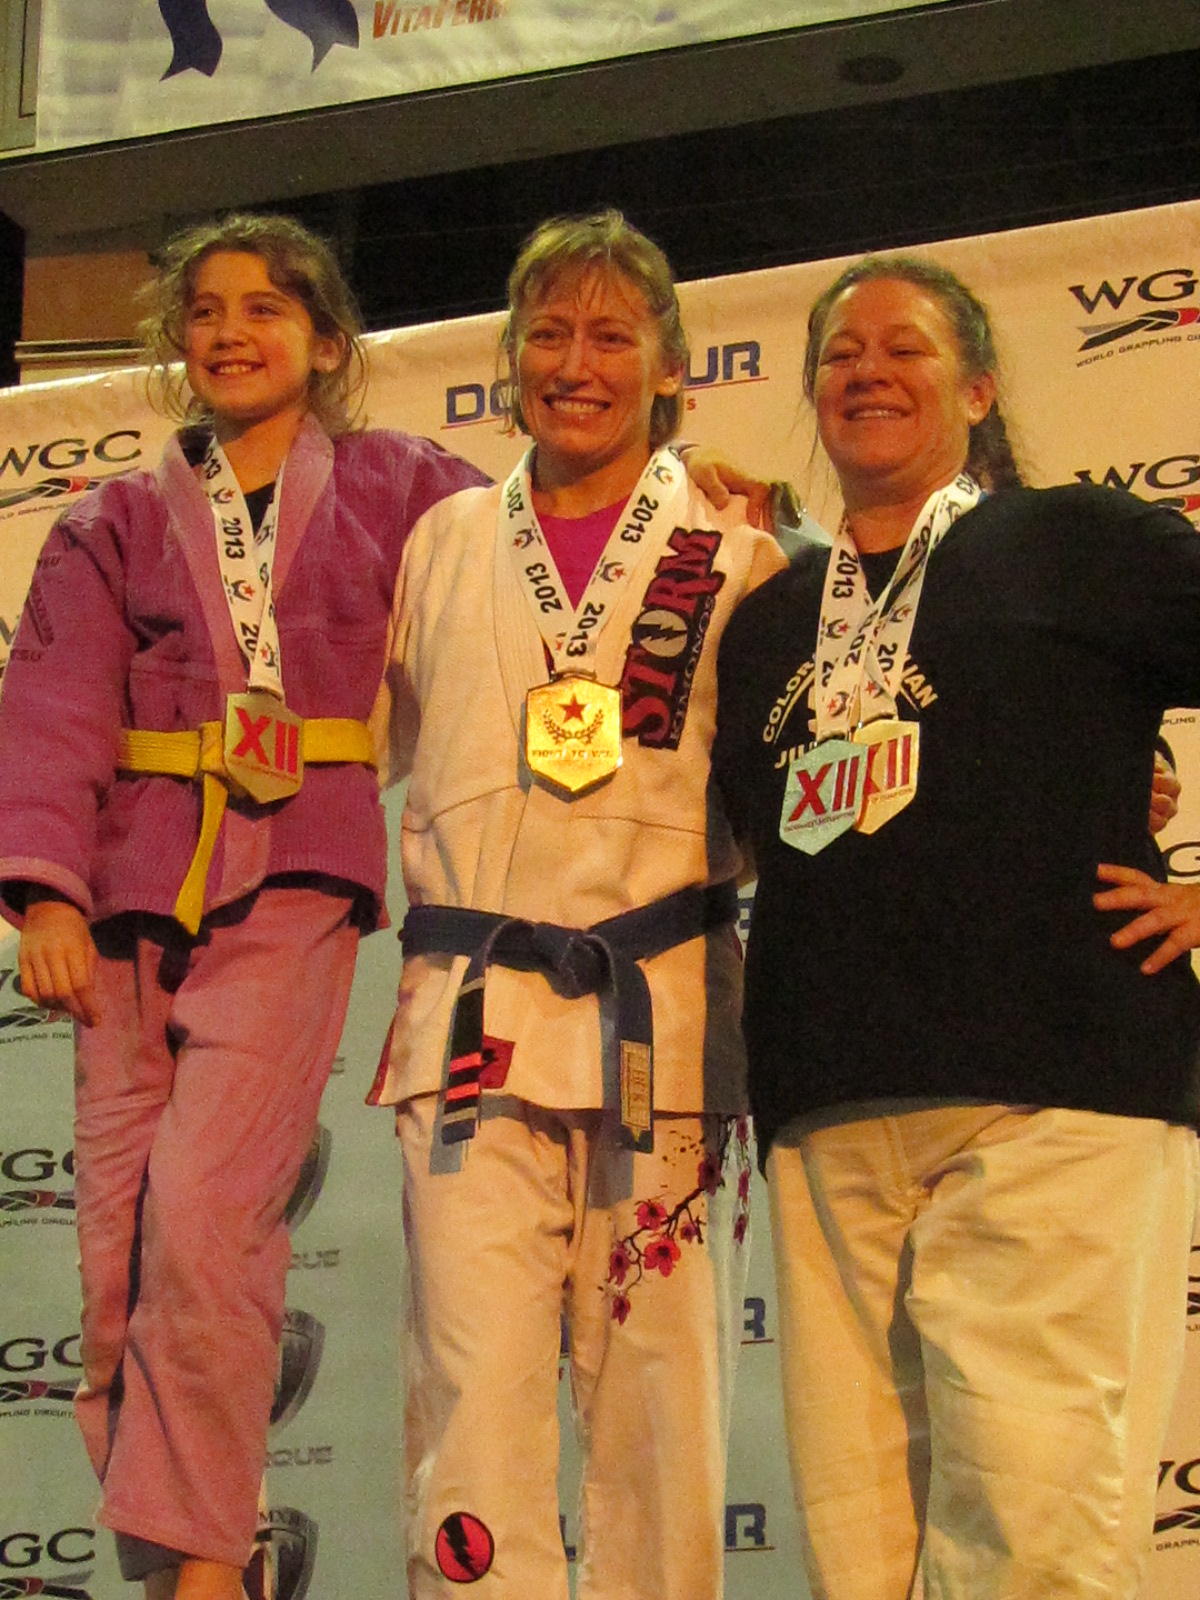 CBJJ Stapleton Ladies on the Medal Stand - 2013 Fight To Win Tournament of Champions 12 - Kate Stewart (Gold) - Teri Stewart (Gold) - Heather Westman (Silver & Bronze)